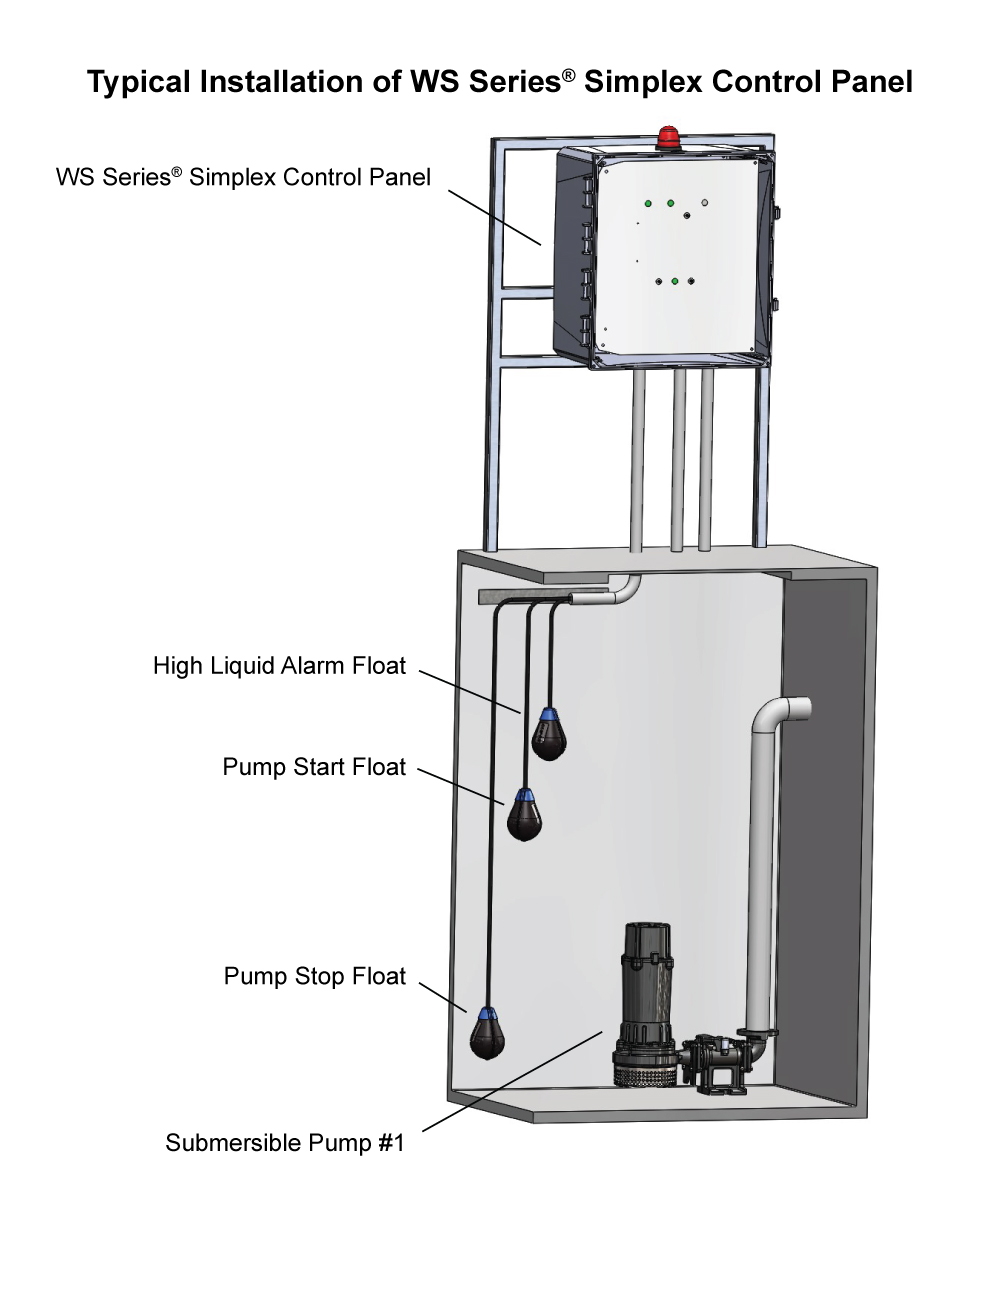 Typical Application: Single Phase Simplex Demand WS1P-TP